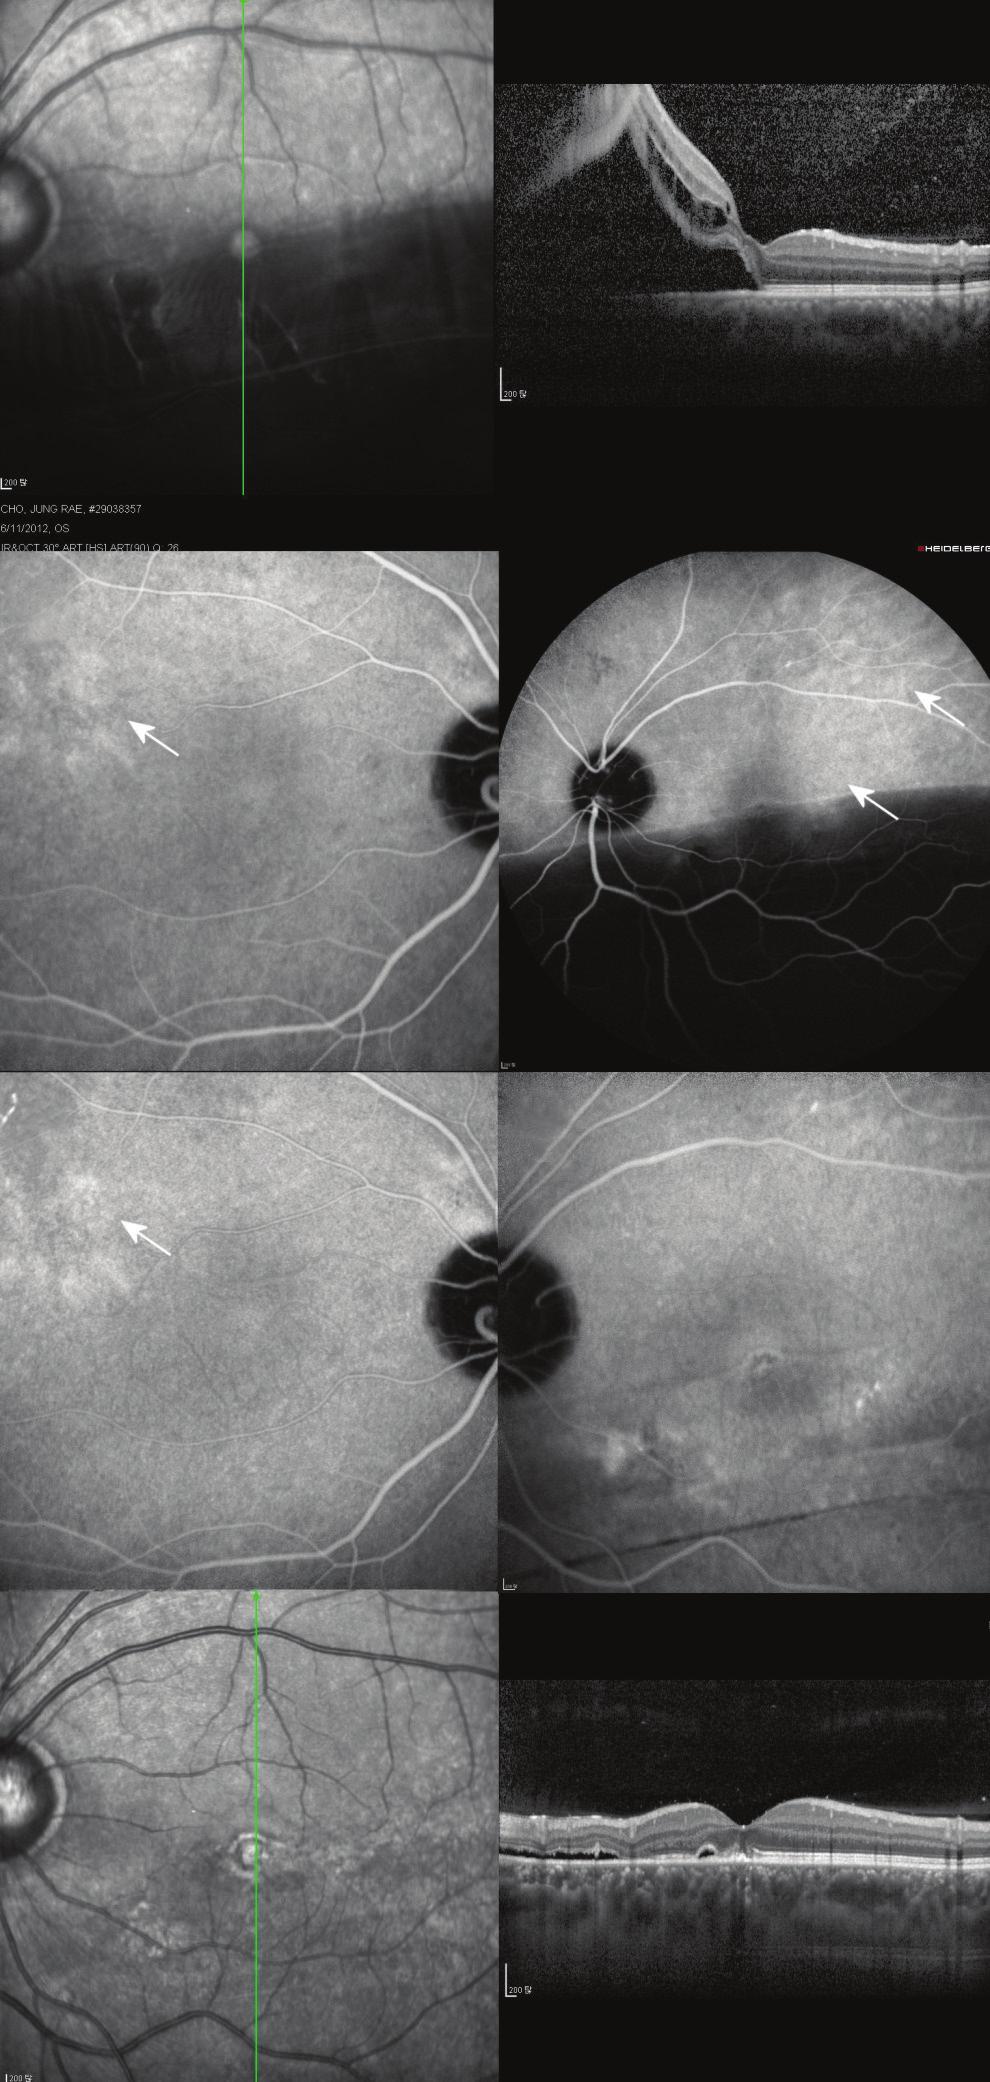 (B) Preoperative indocyanine green angiography shows choroidal vascular hyperpermeability (arrows) around the macula.